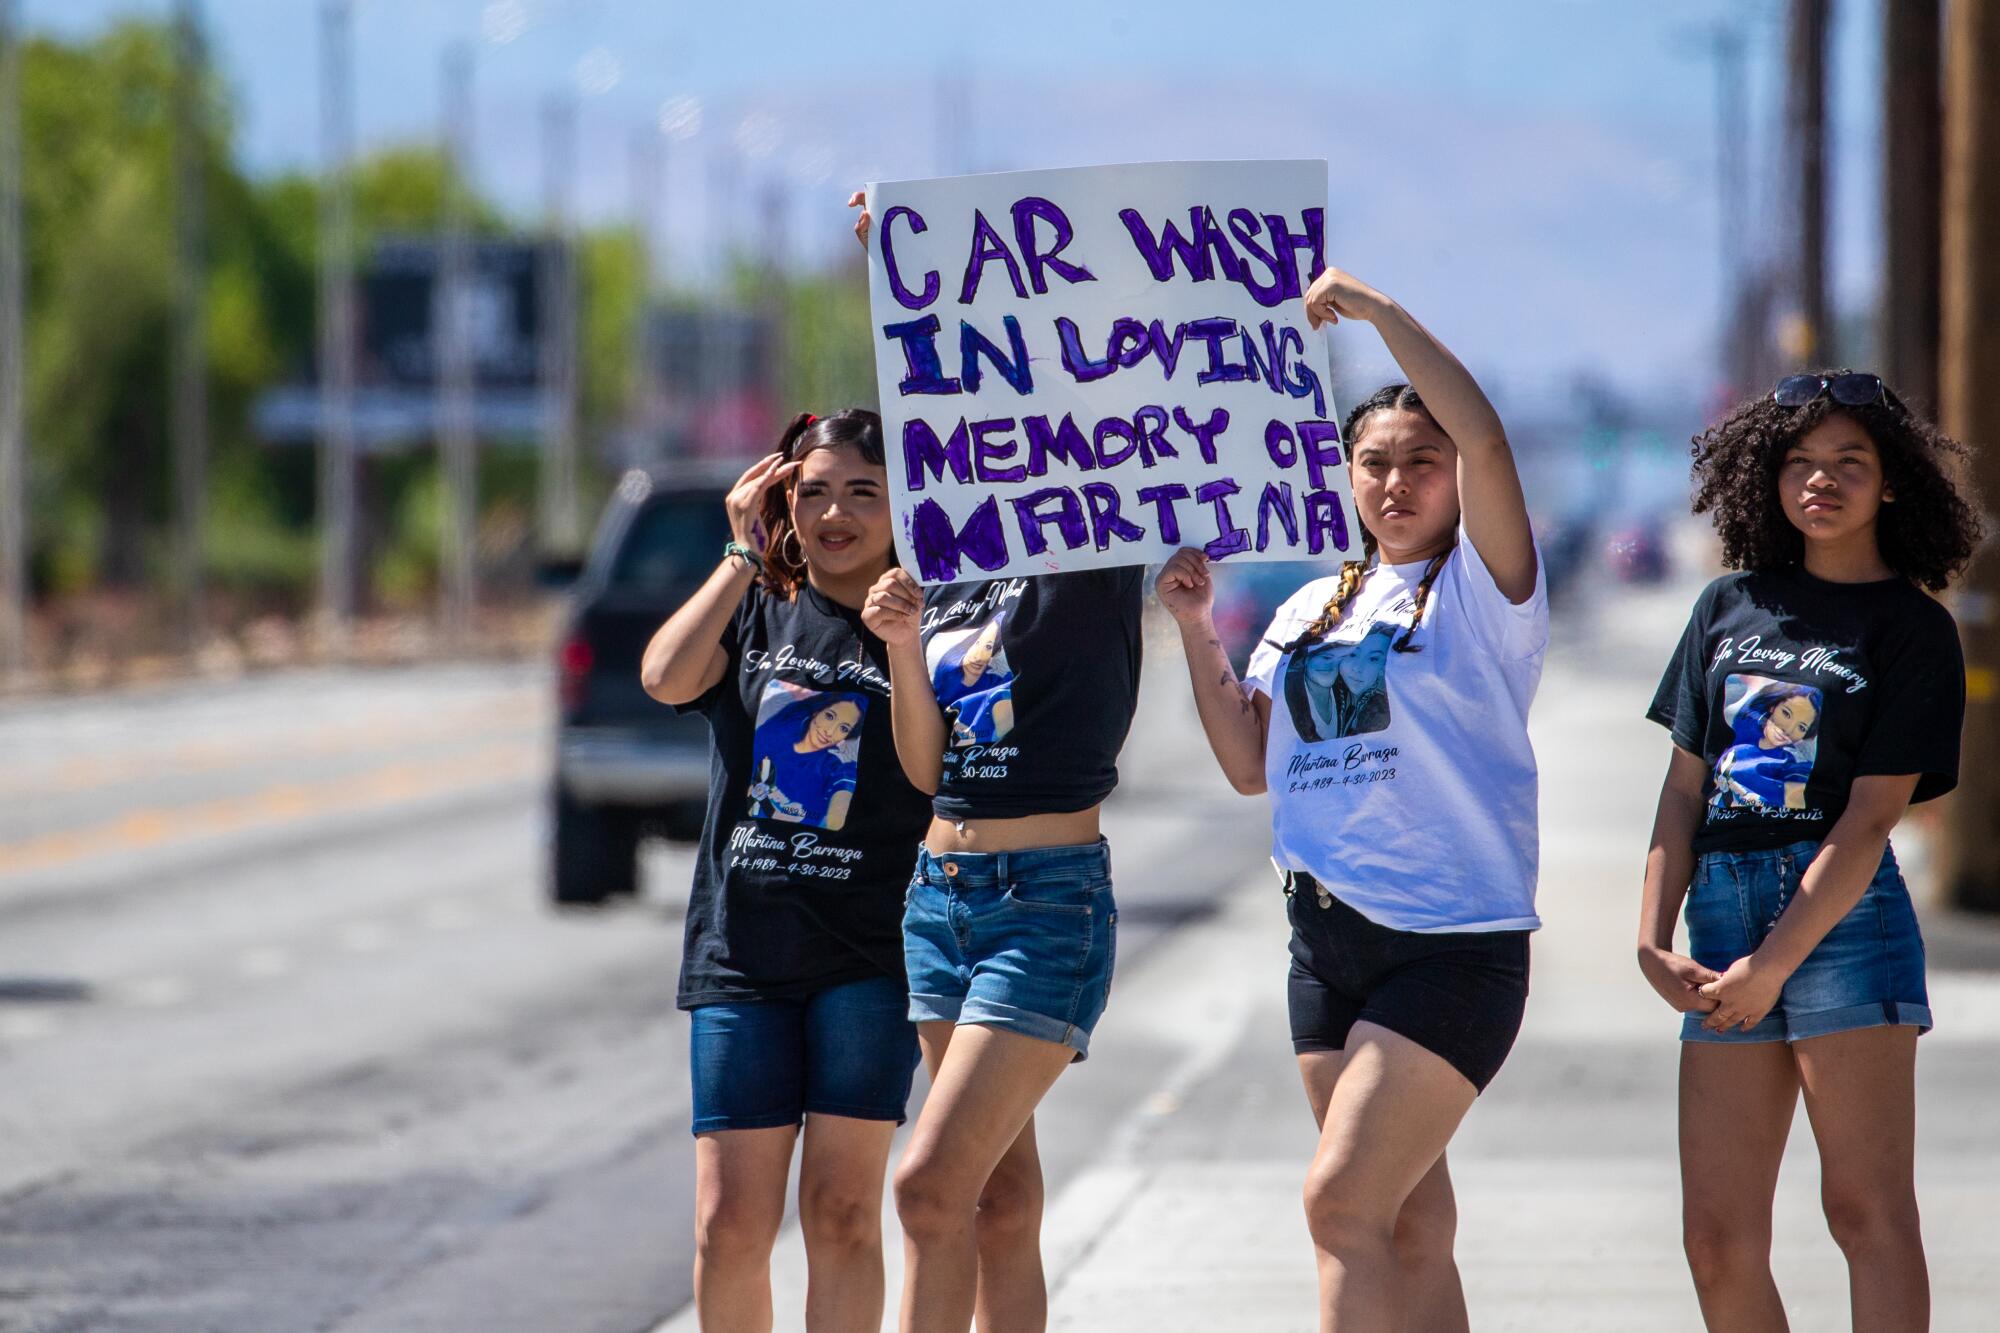 Four teenage girls stand on a roadside holding a hand-painted sign that says "Car wash in loving memory of Martina"